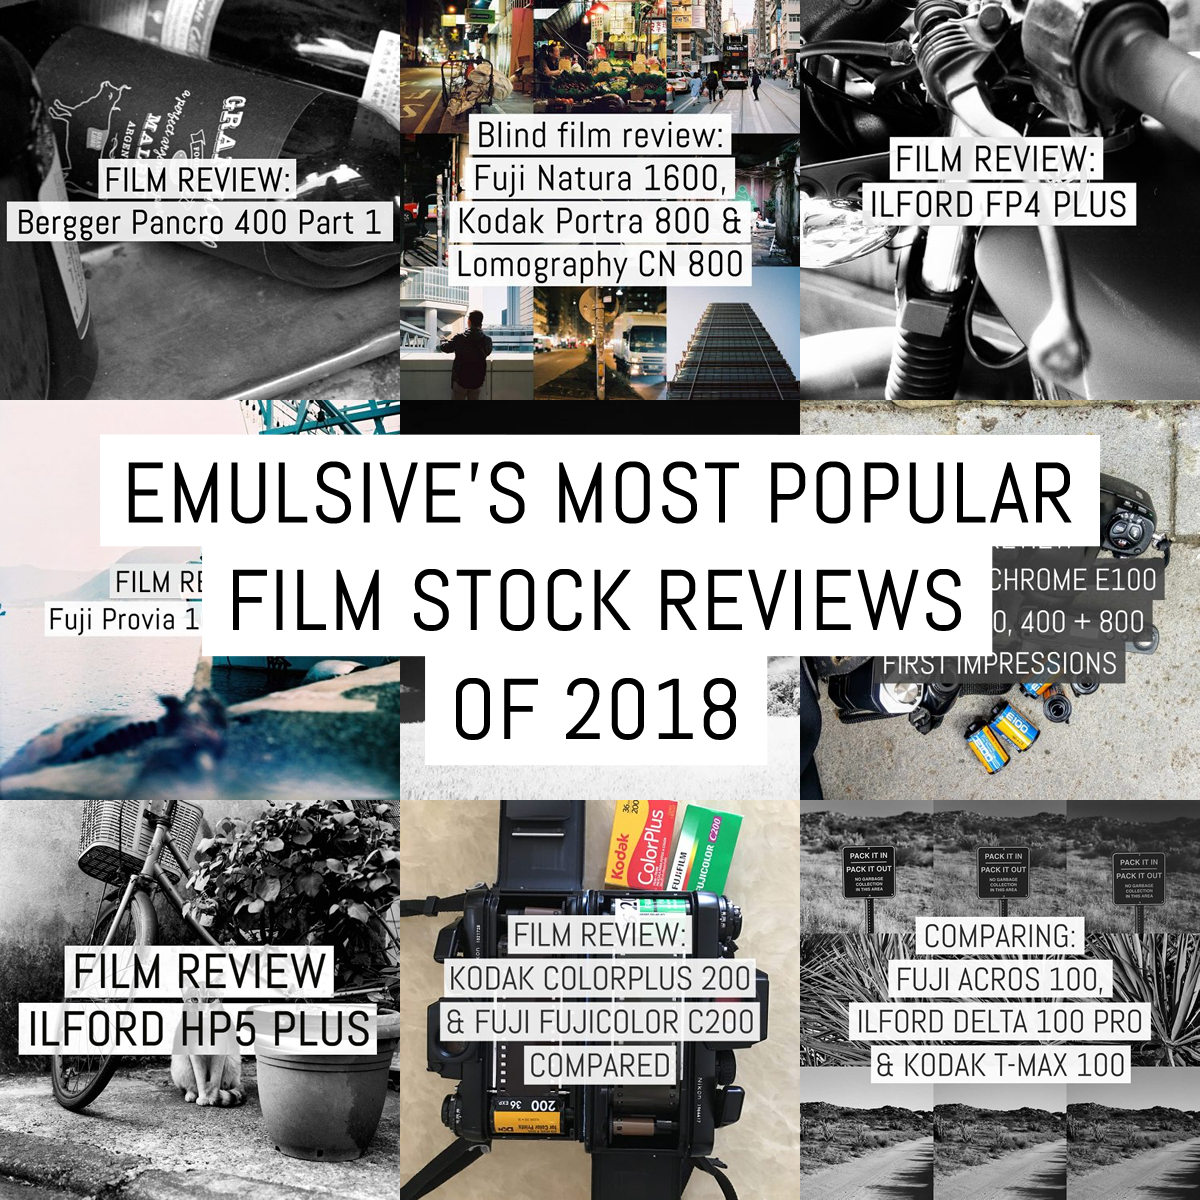 EMULSIVE's most popular film stock reviews of 2018